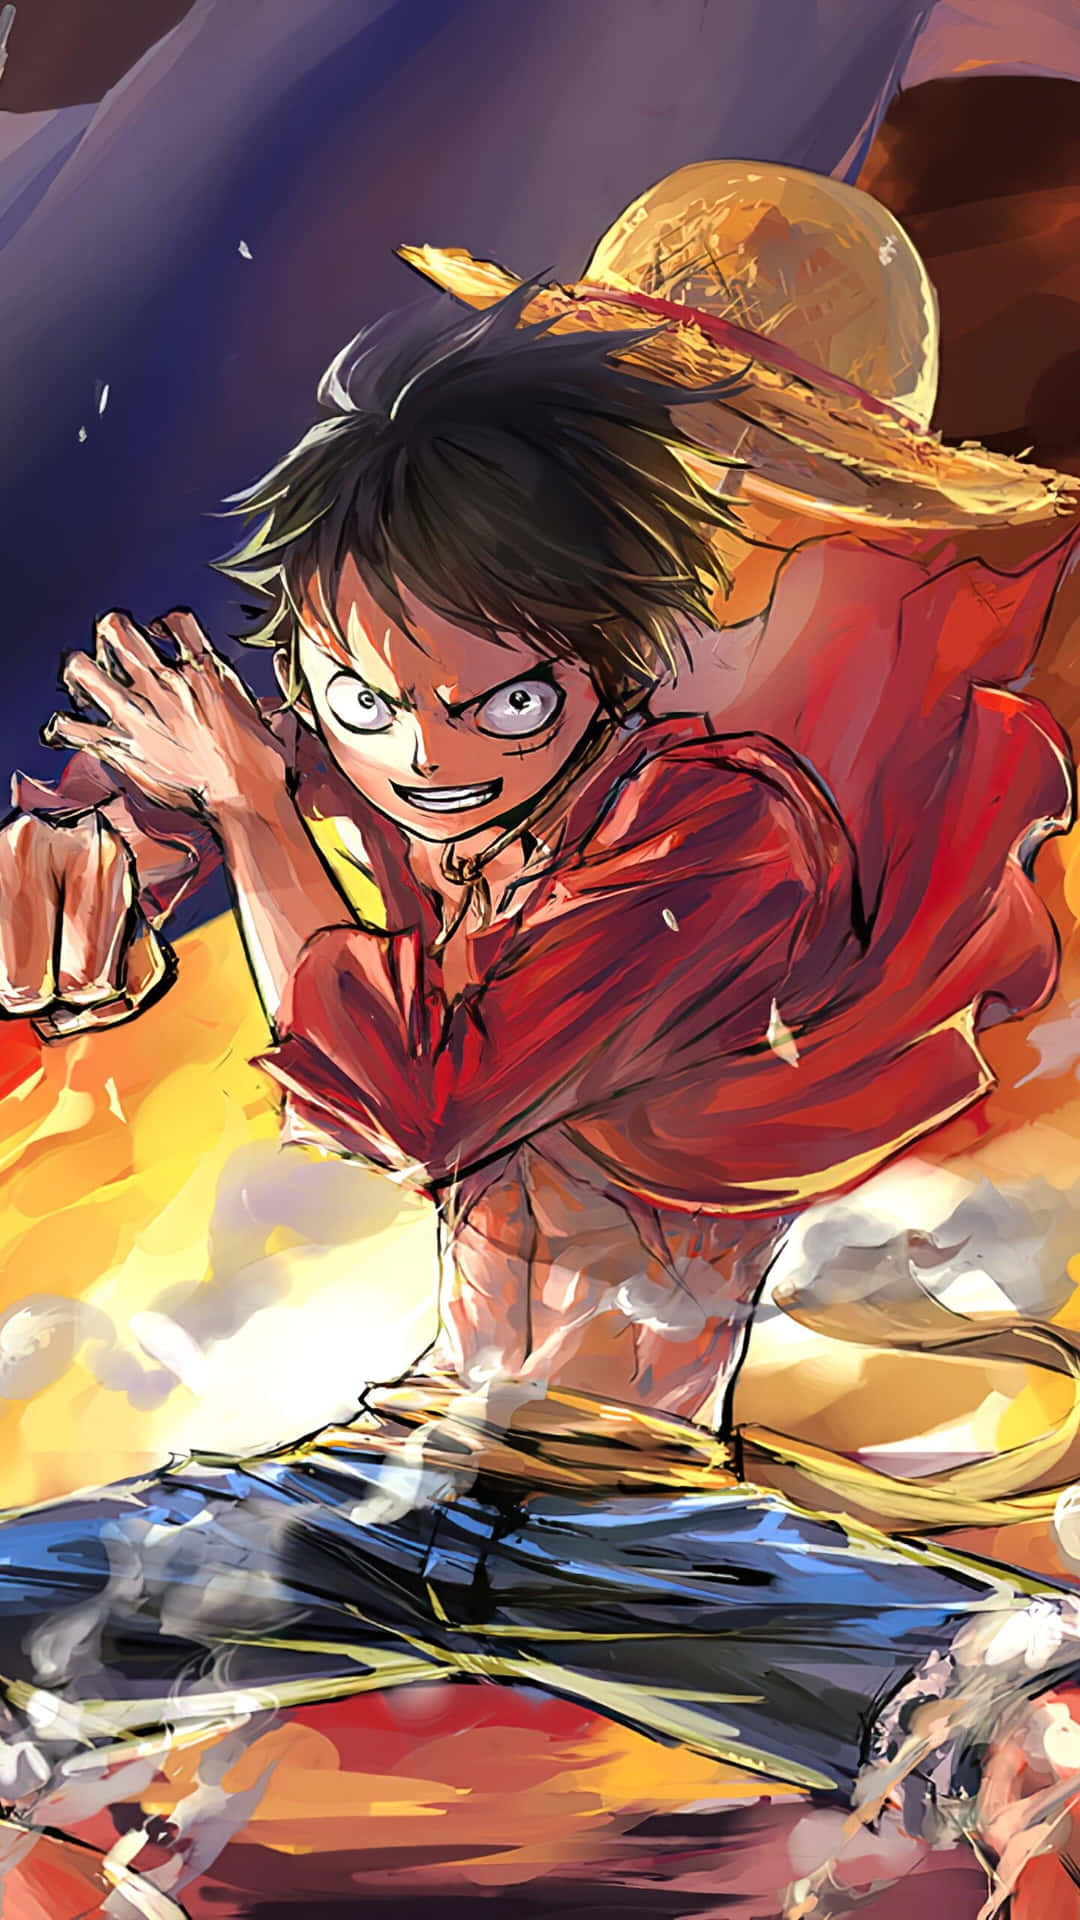 Luffy, the main protagonist of the popular anime series 'One Piece'